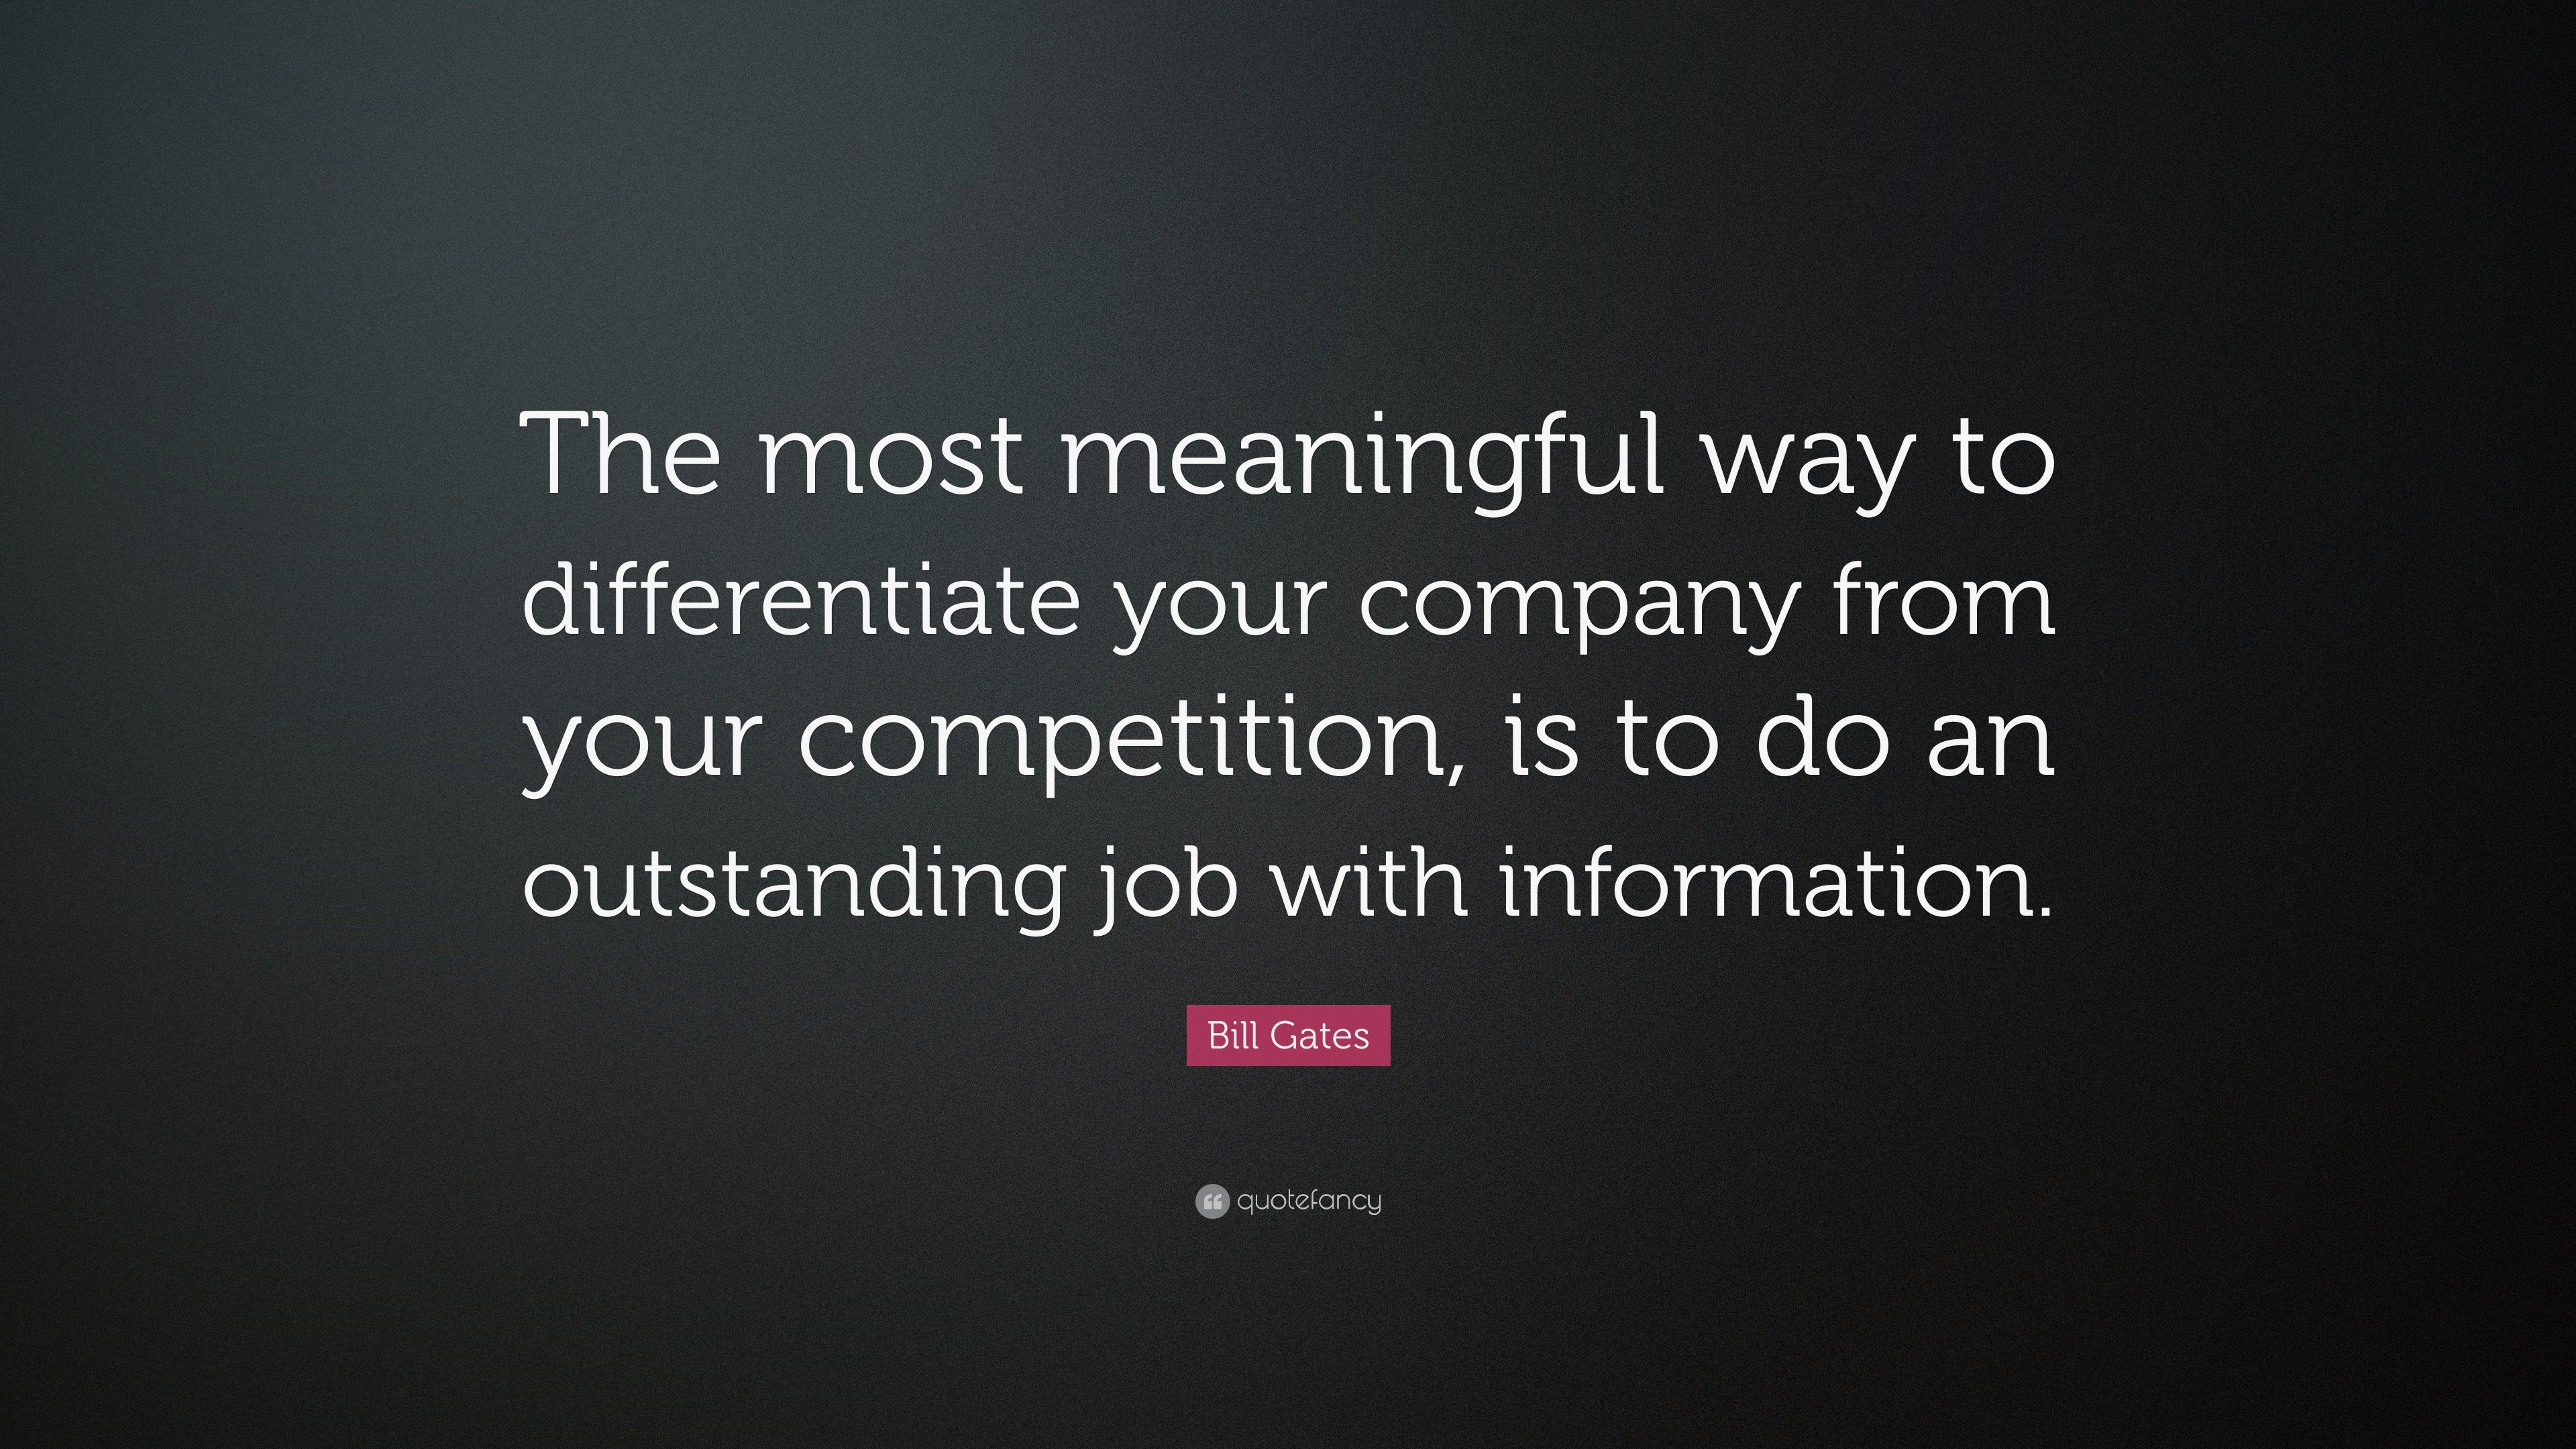 Bill Gates Quote: “The most meaningful way to differentiate your ...